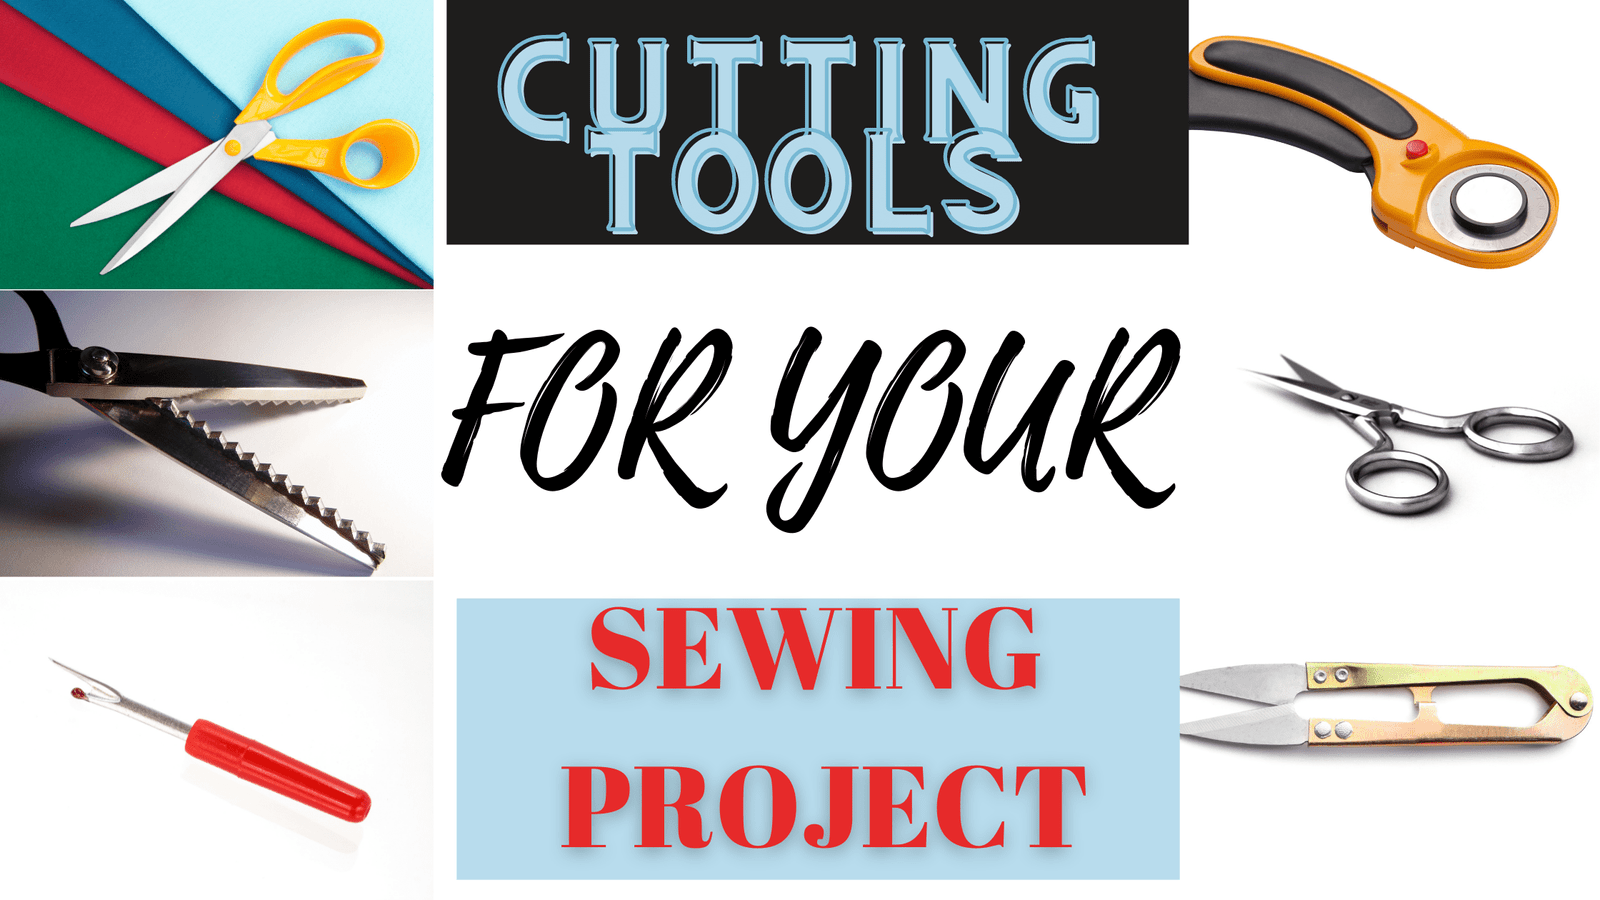 You are currently viewing CUTTING TOOLS FOR SEWING AND THEIR USES.